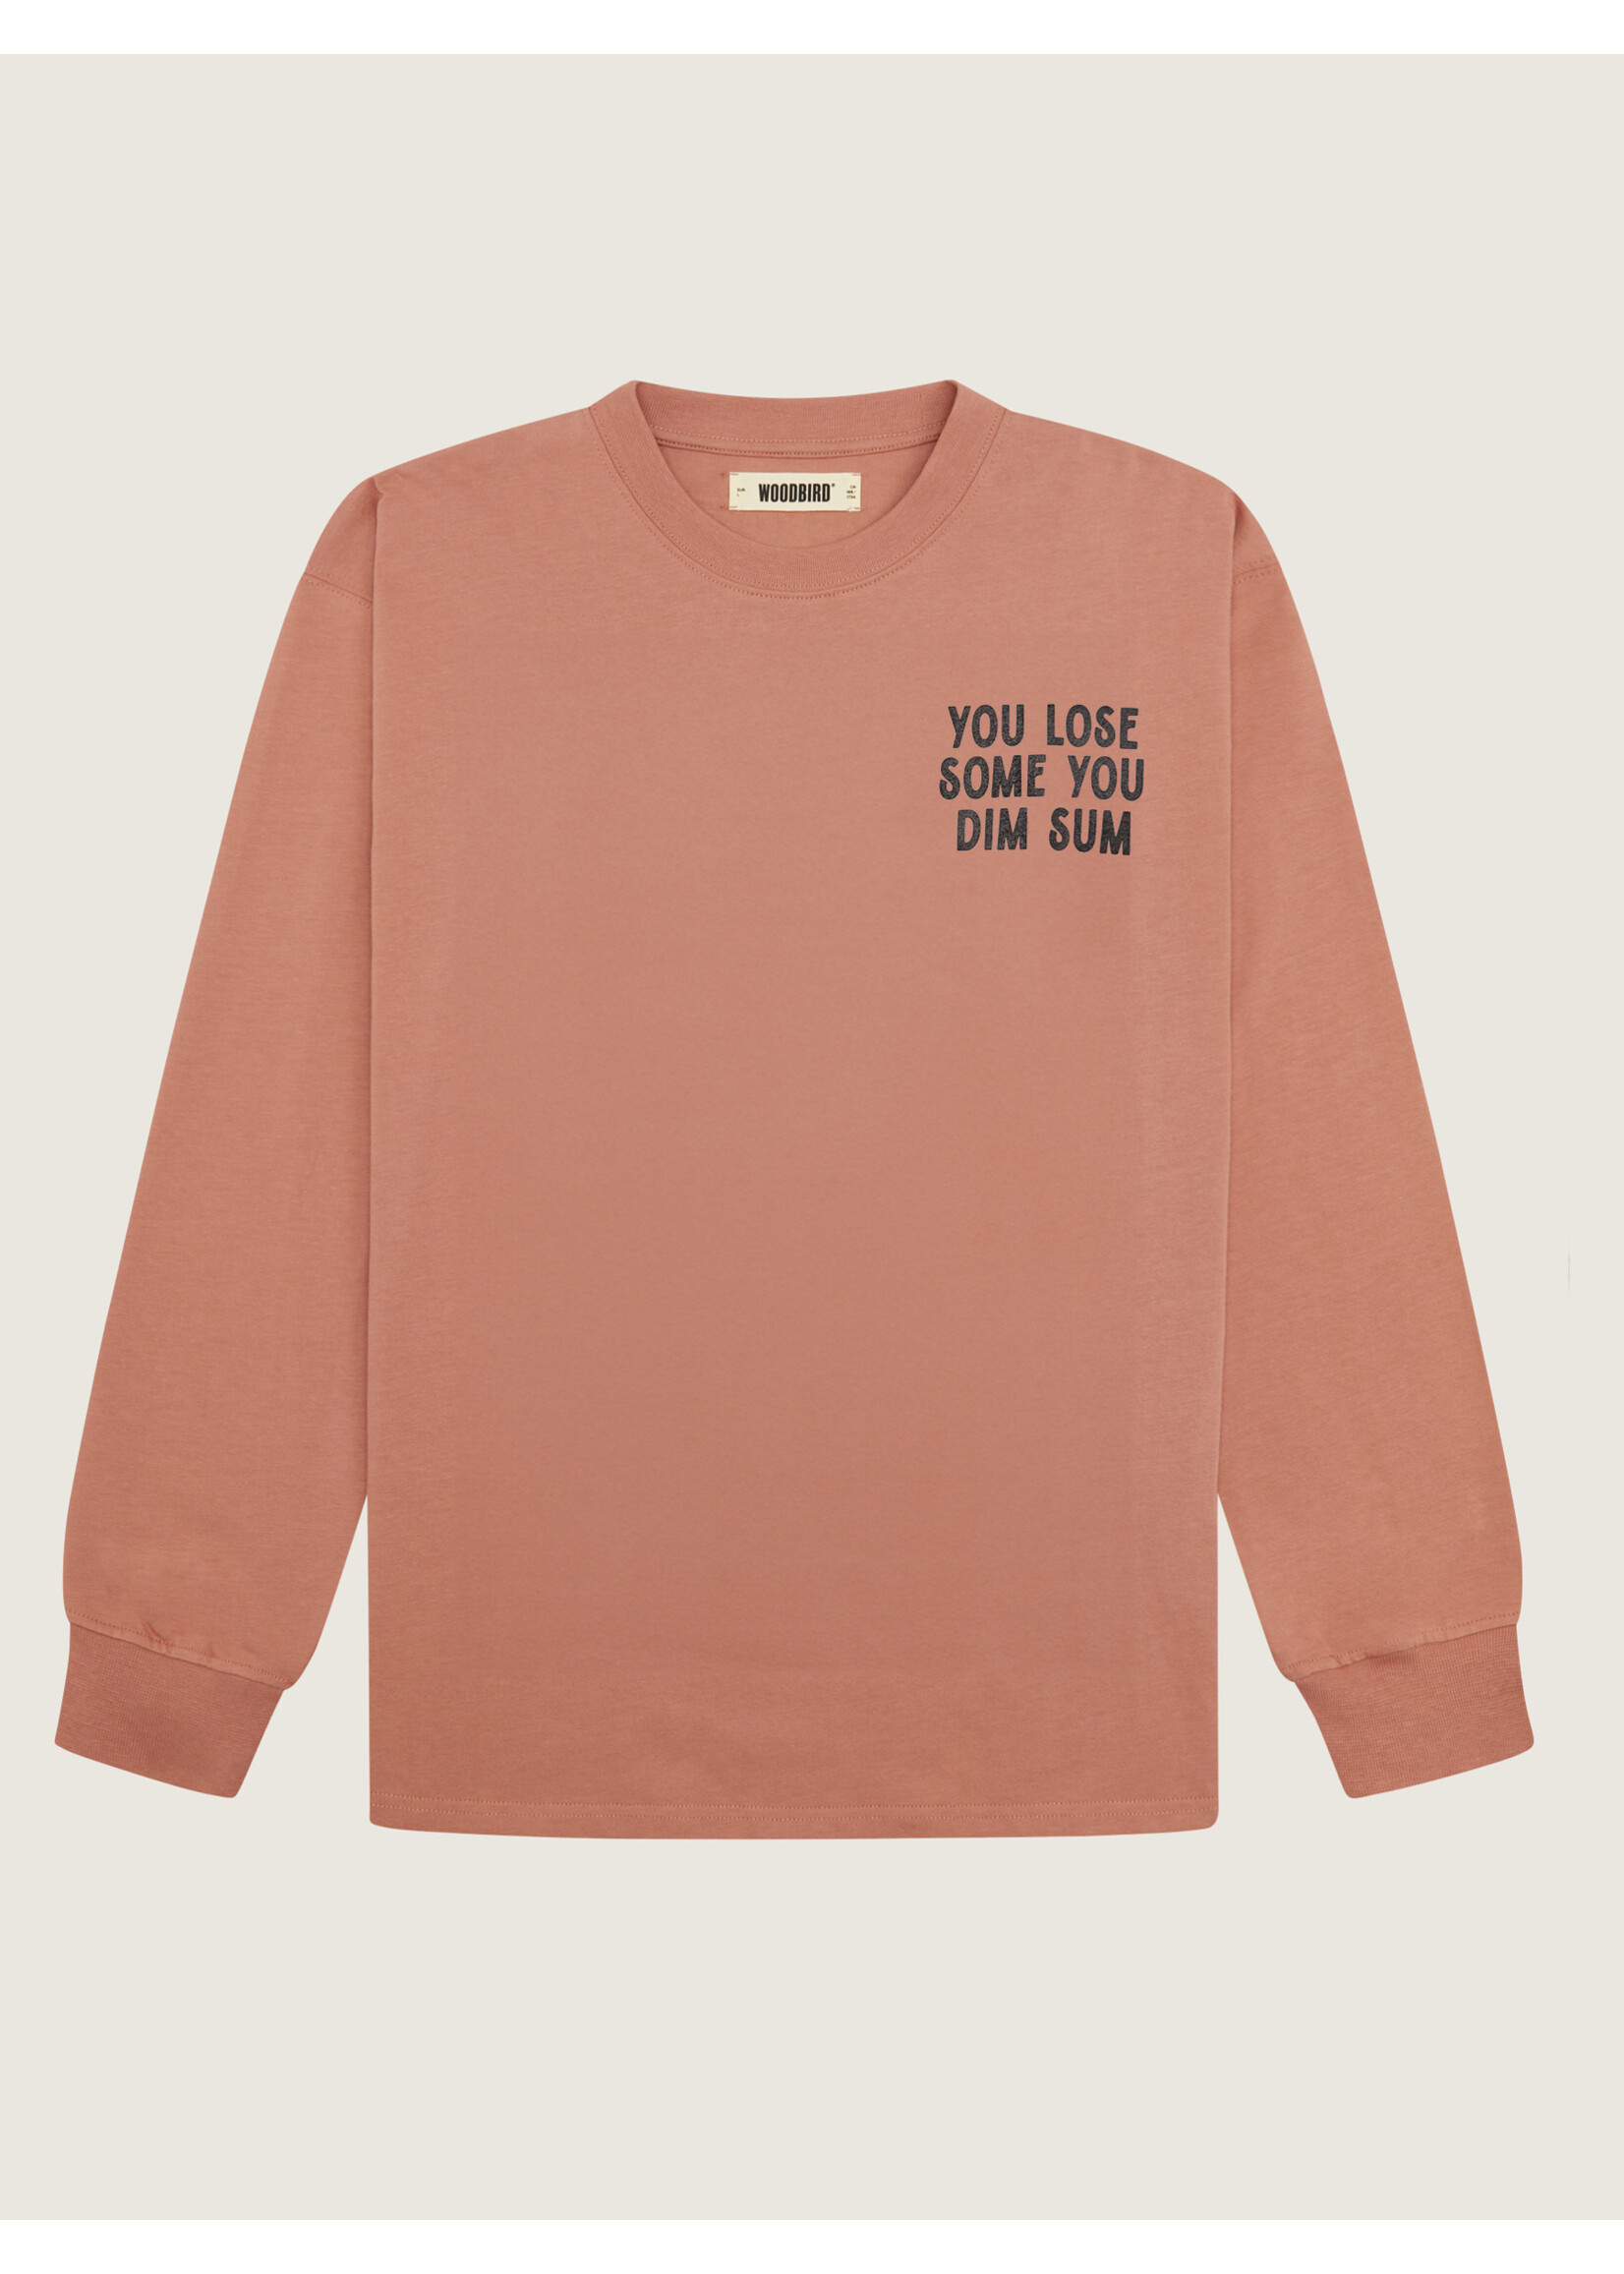 Woodbird WBHanes DimSum L/S Red Clay 2416-419